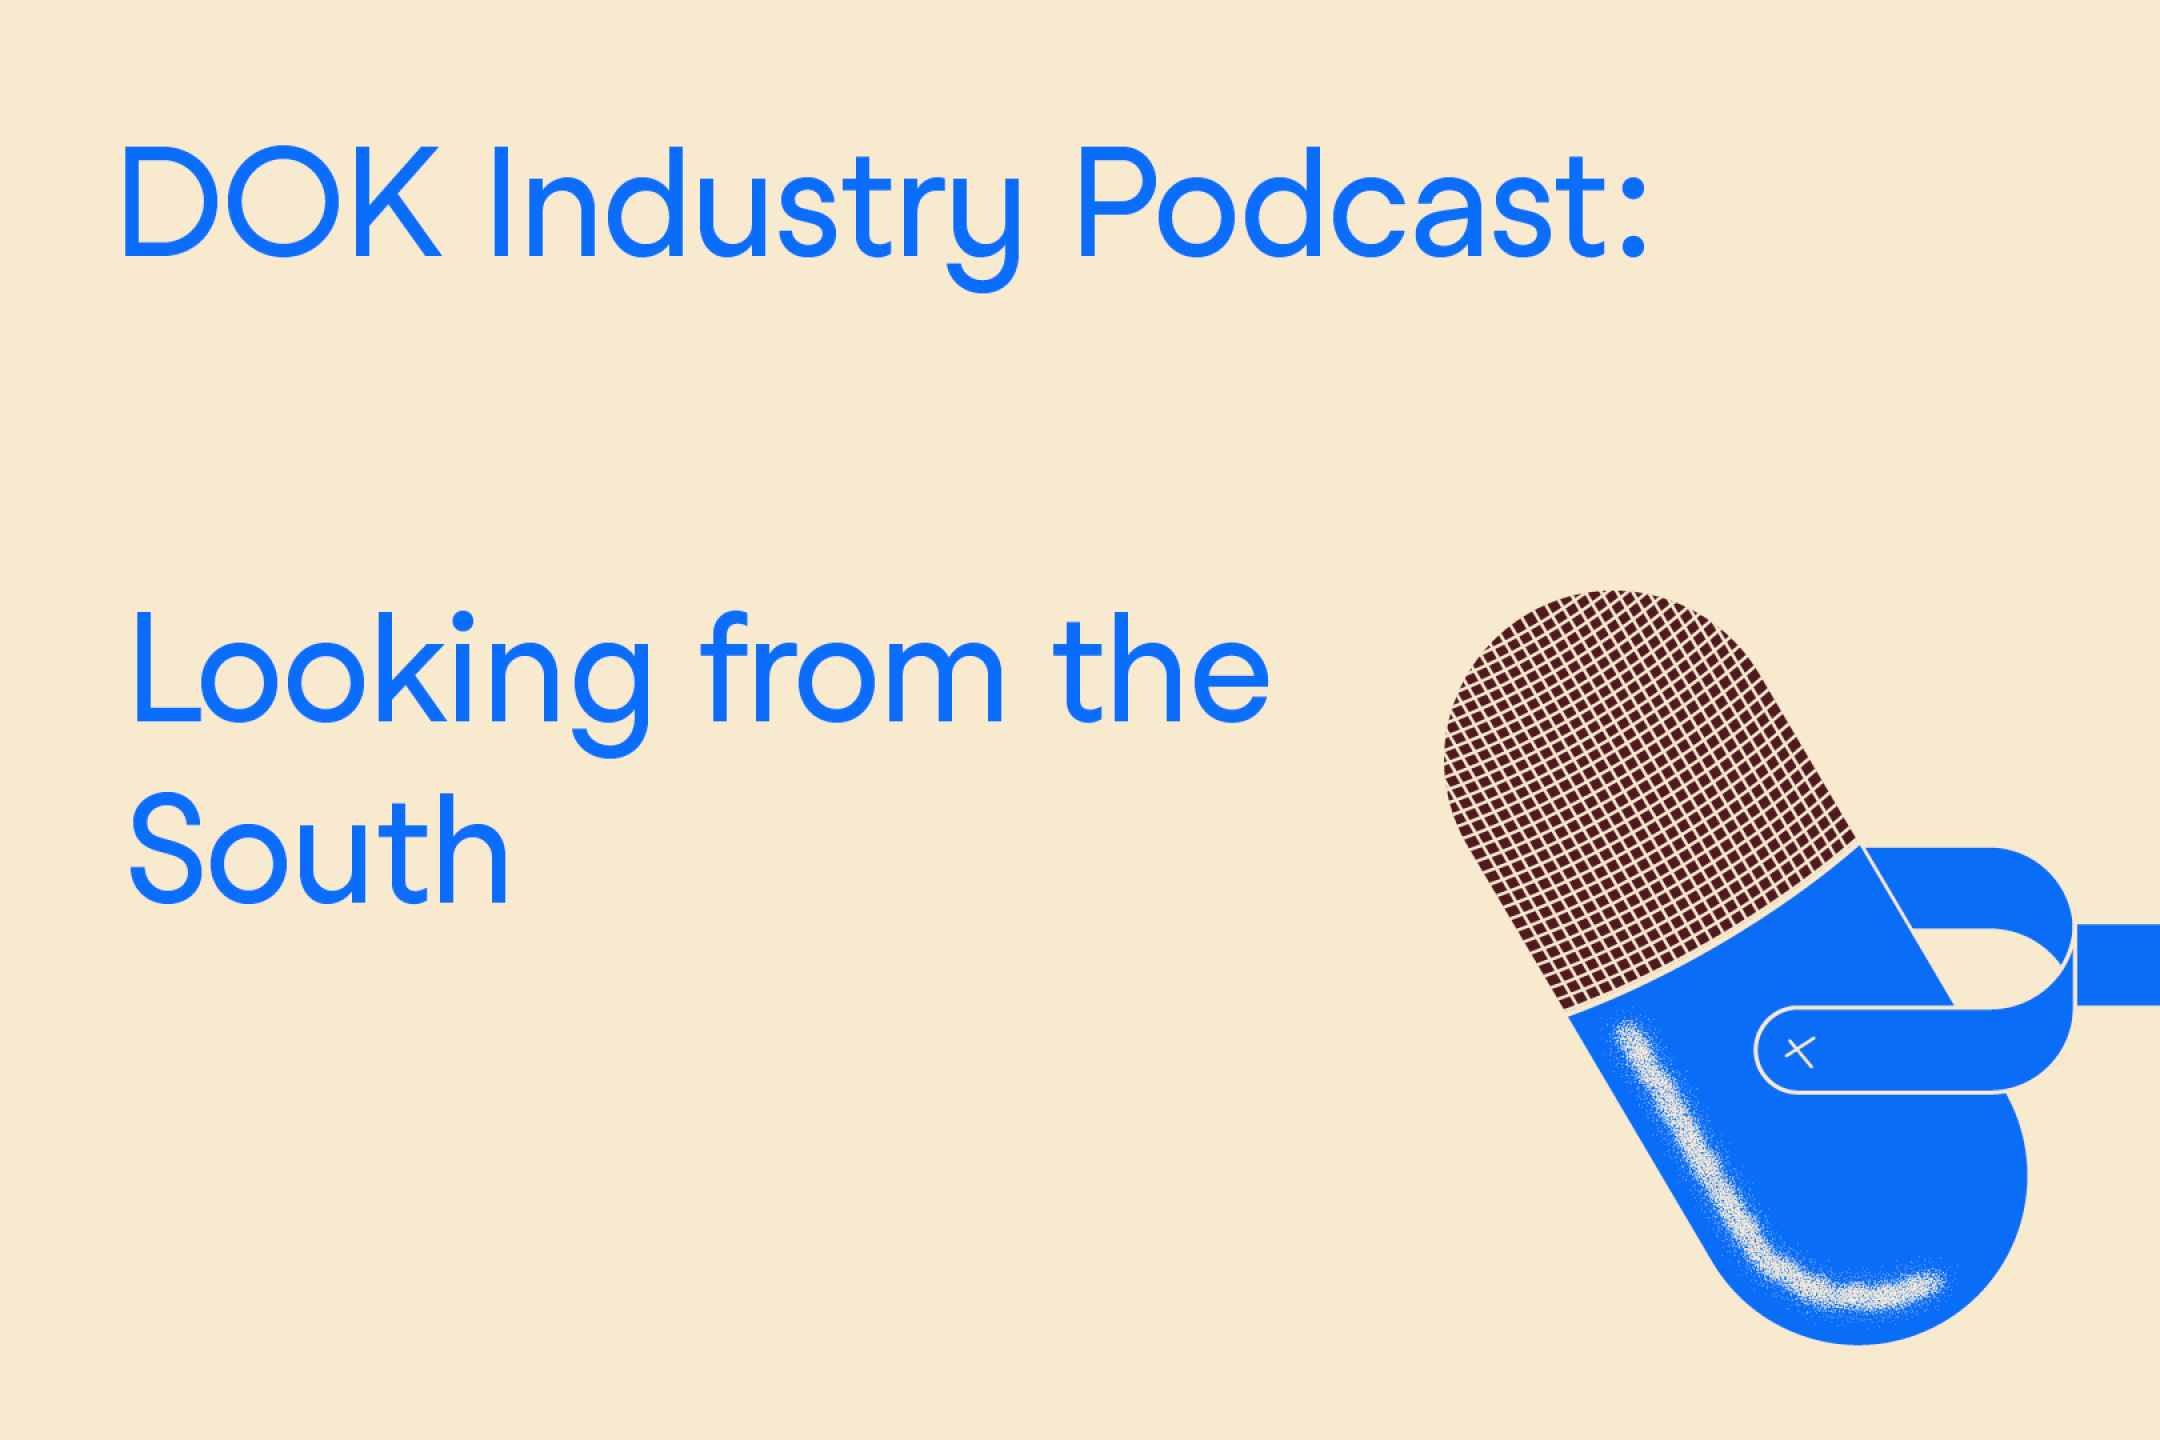 A text graphic with blue letters on a yellow background. At the right the illustration of a microphone. At the left the text: “Dok Industry Podcast: Looking from the South”